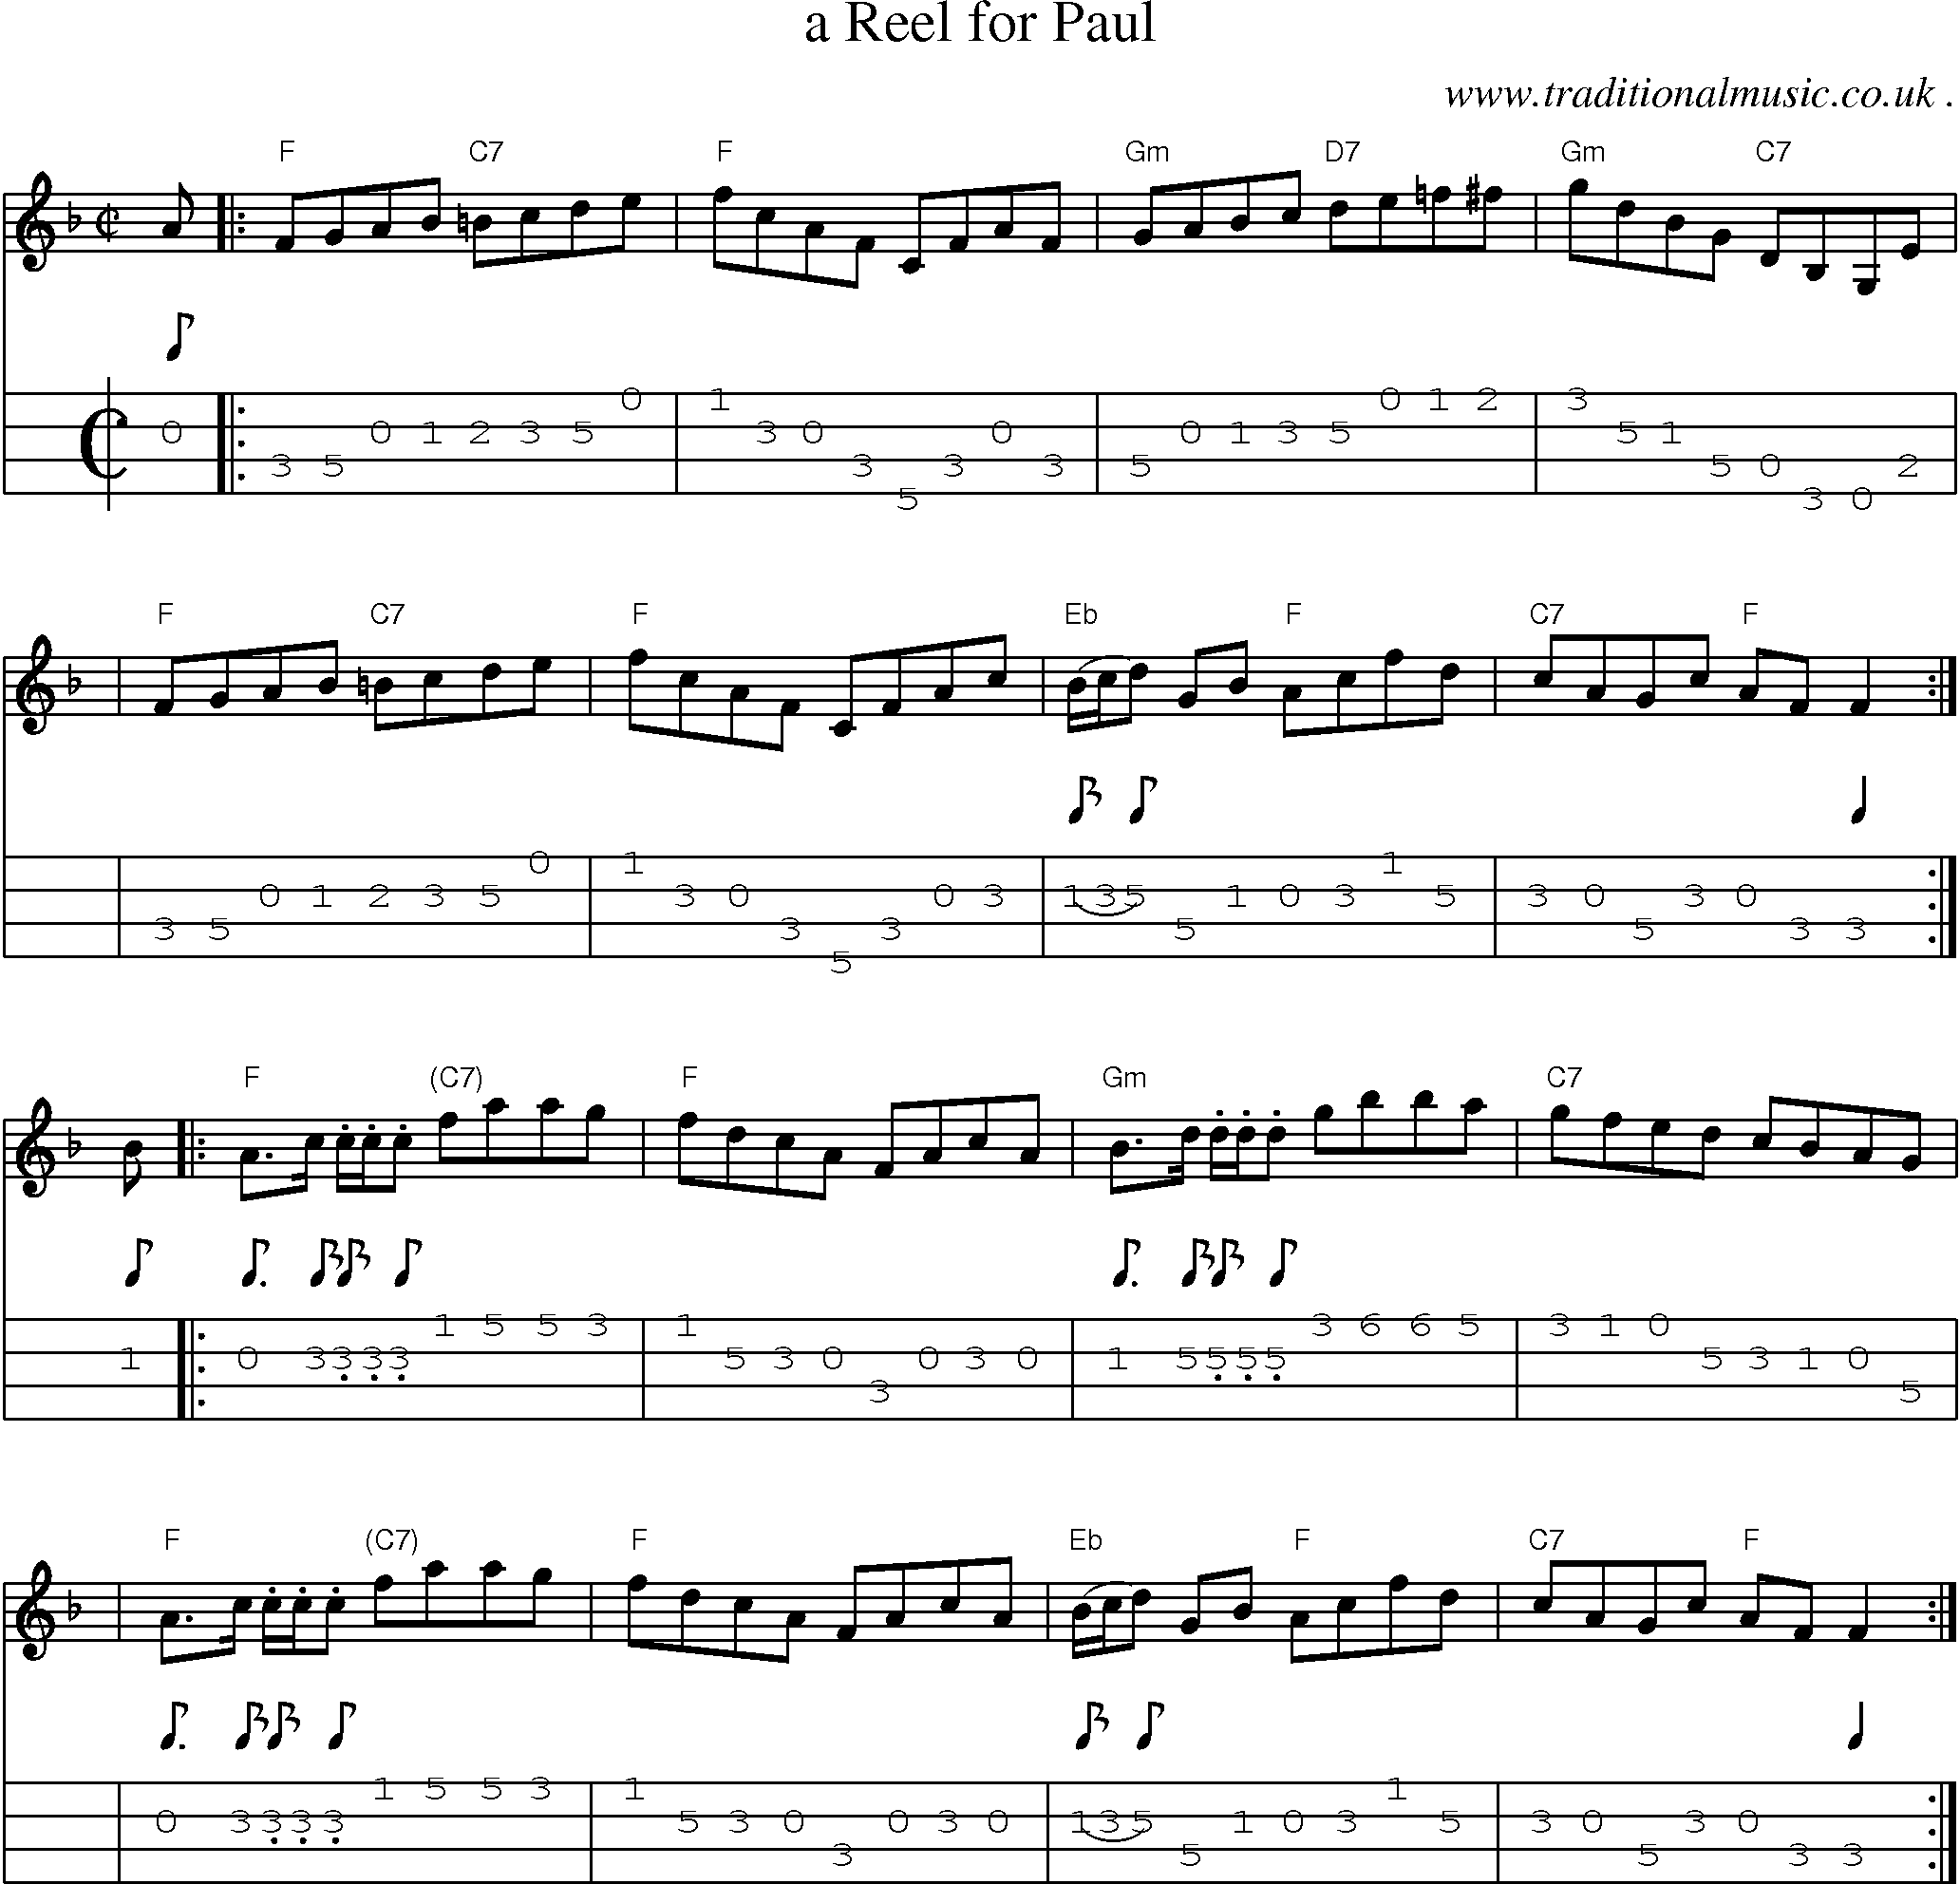 Sheet-music  score, Chords and Mandolin Tabs for A Reel For Paul